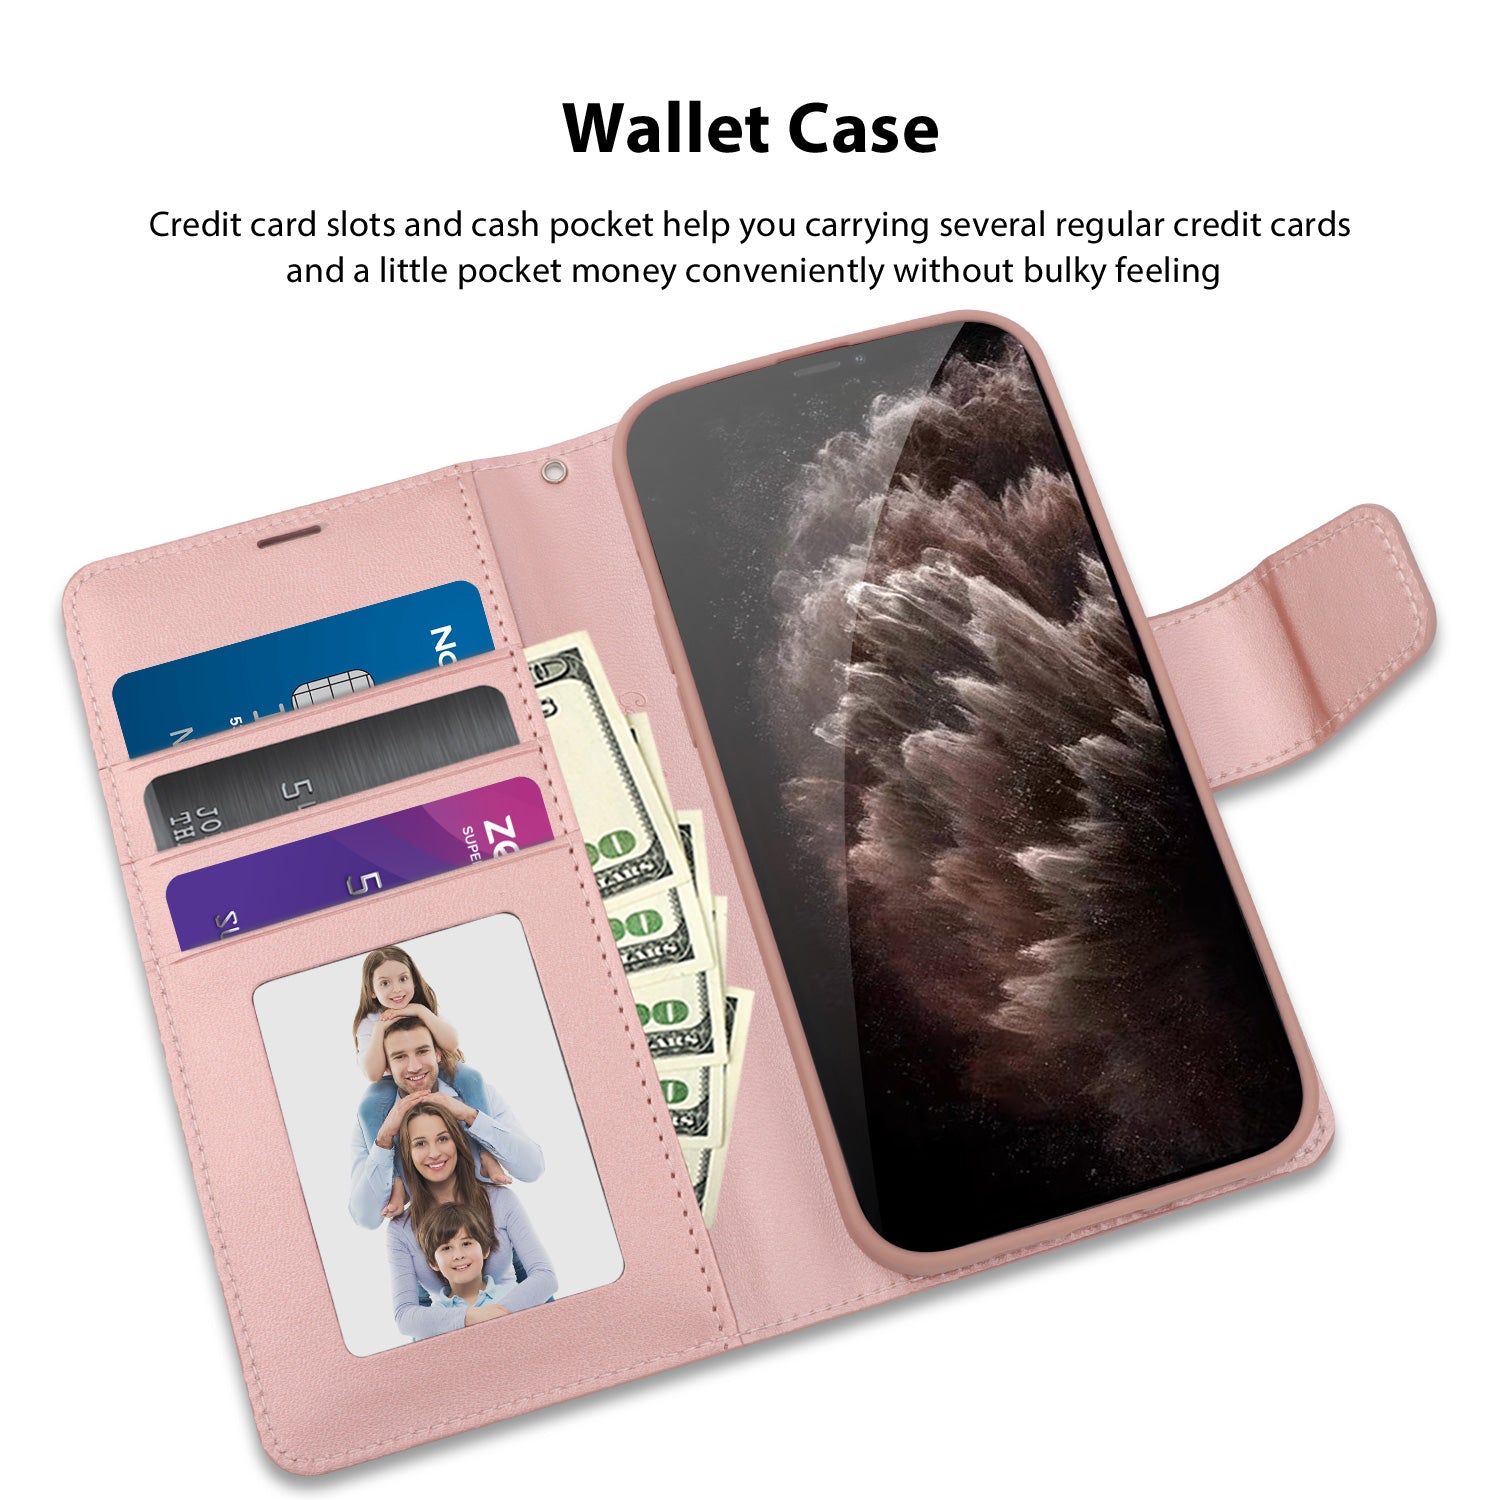 Tough On iPhone 11 Pro Case Leather Wallet Cover Rose Gold